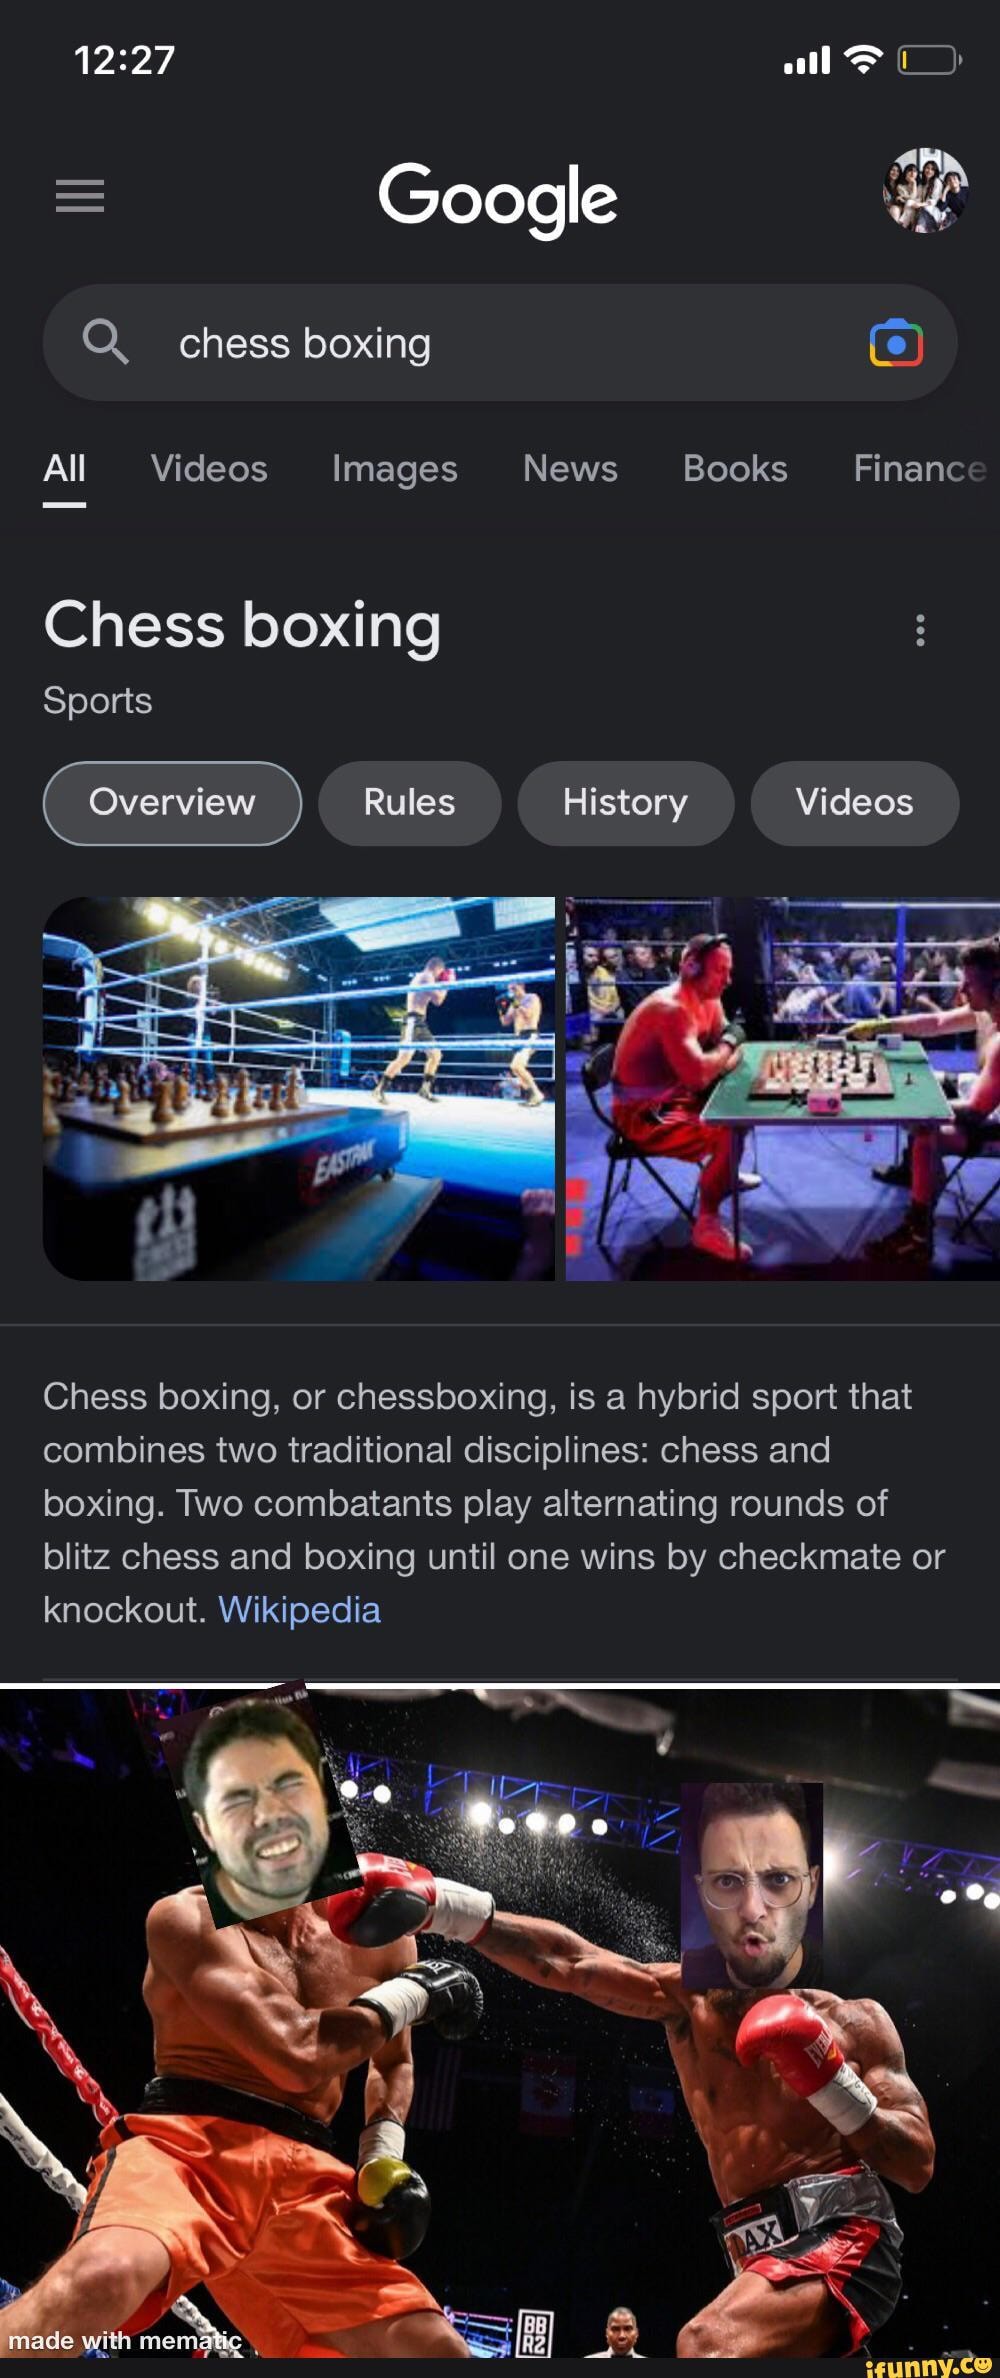 Tag someone you think you could beat at chessboxing #funfacts #chessbo